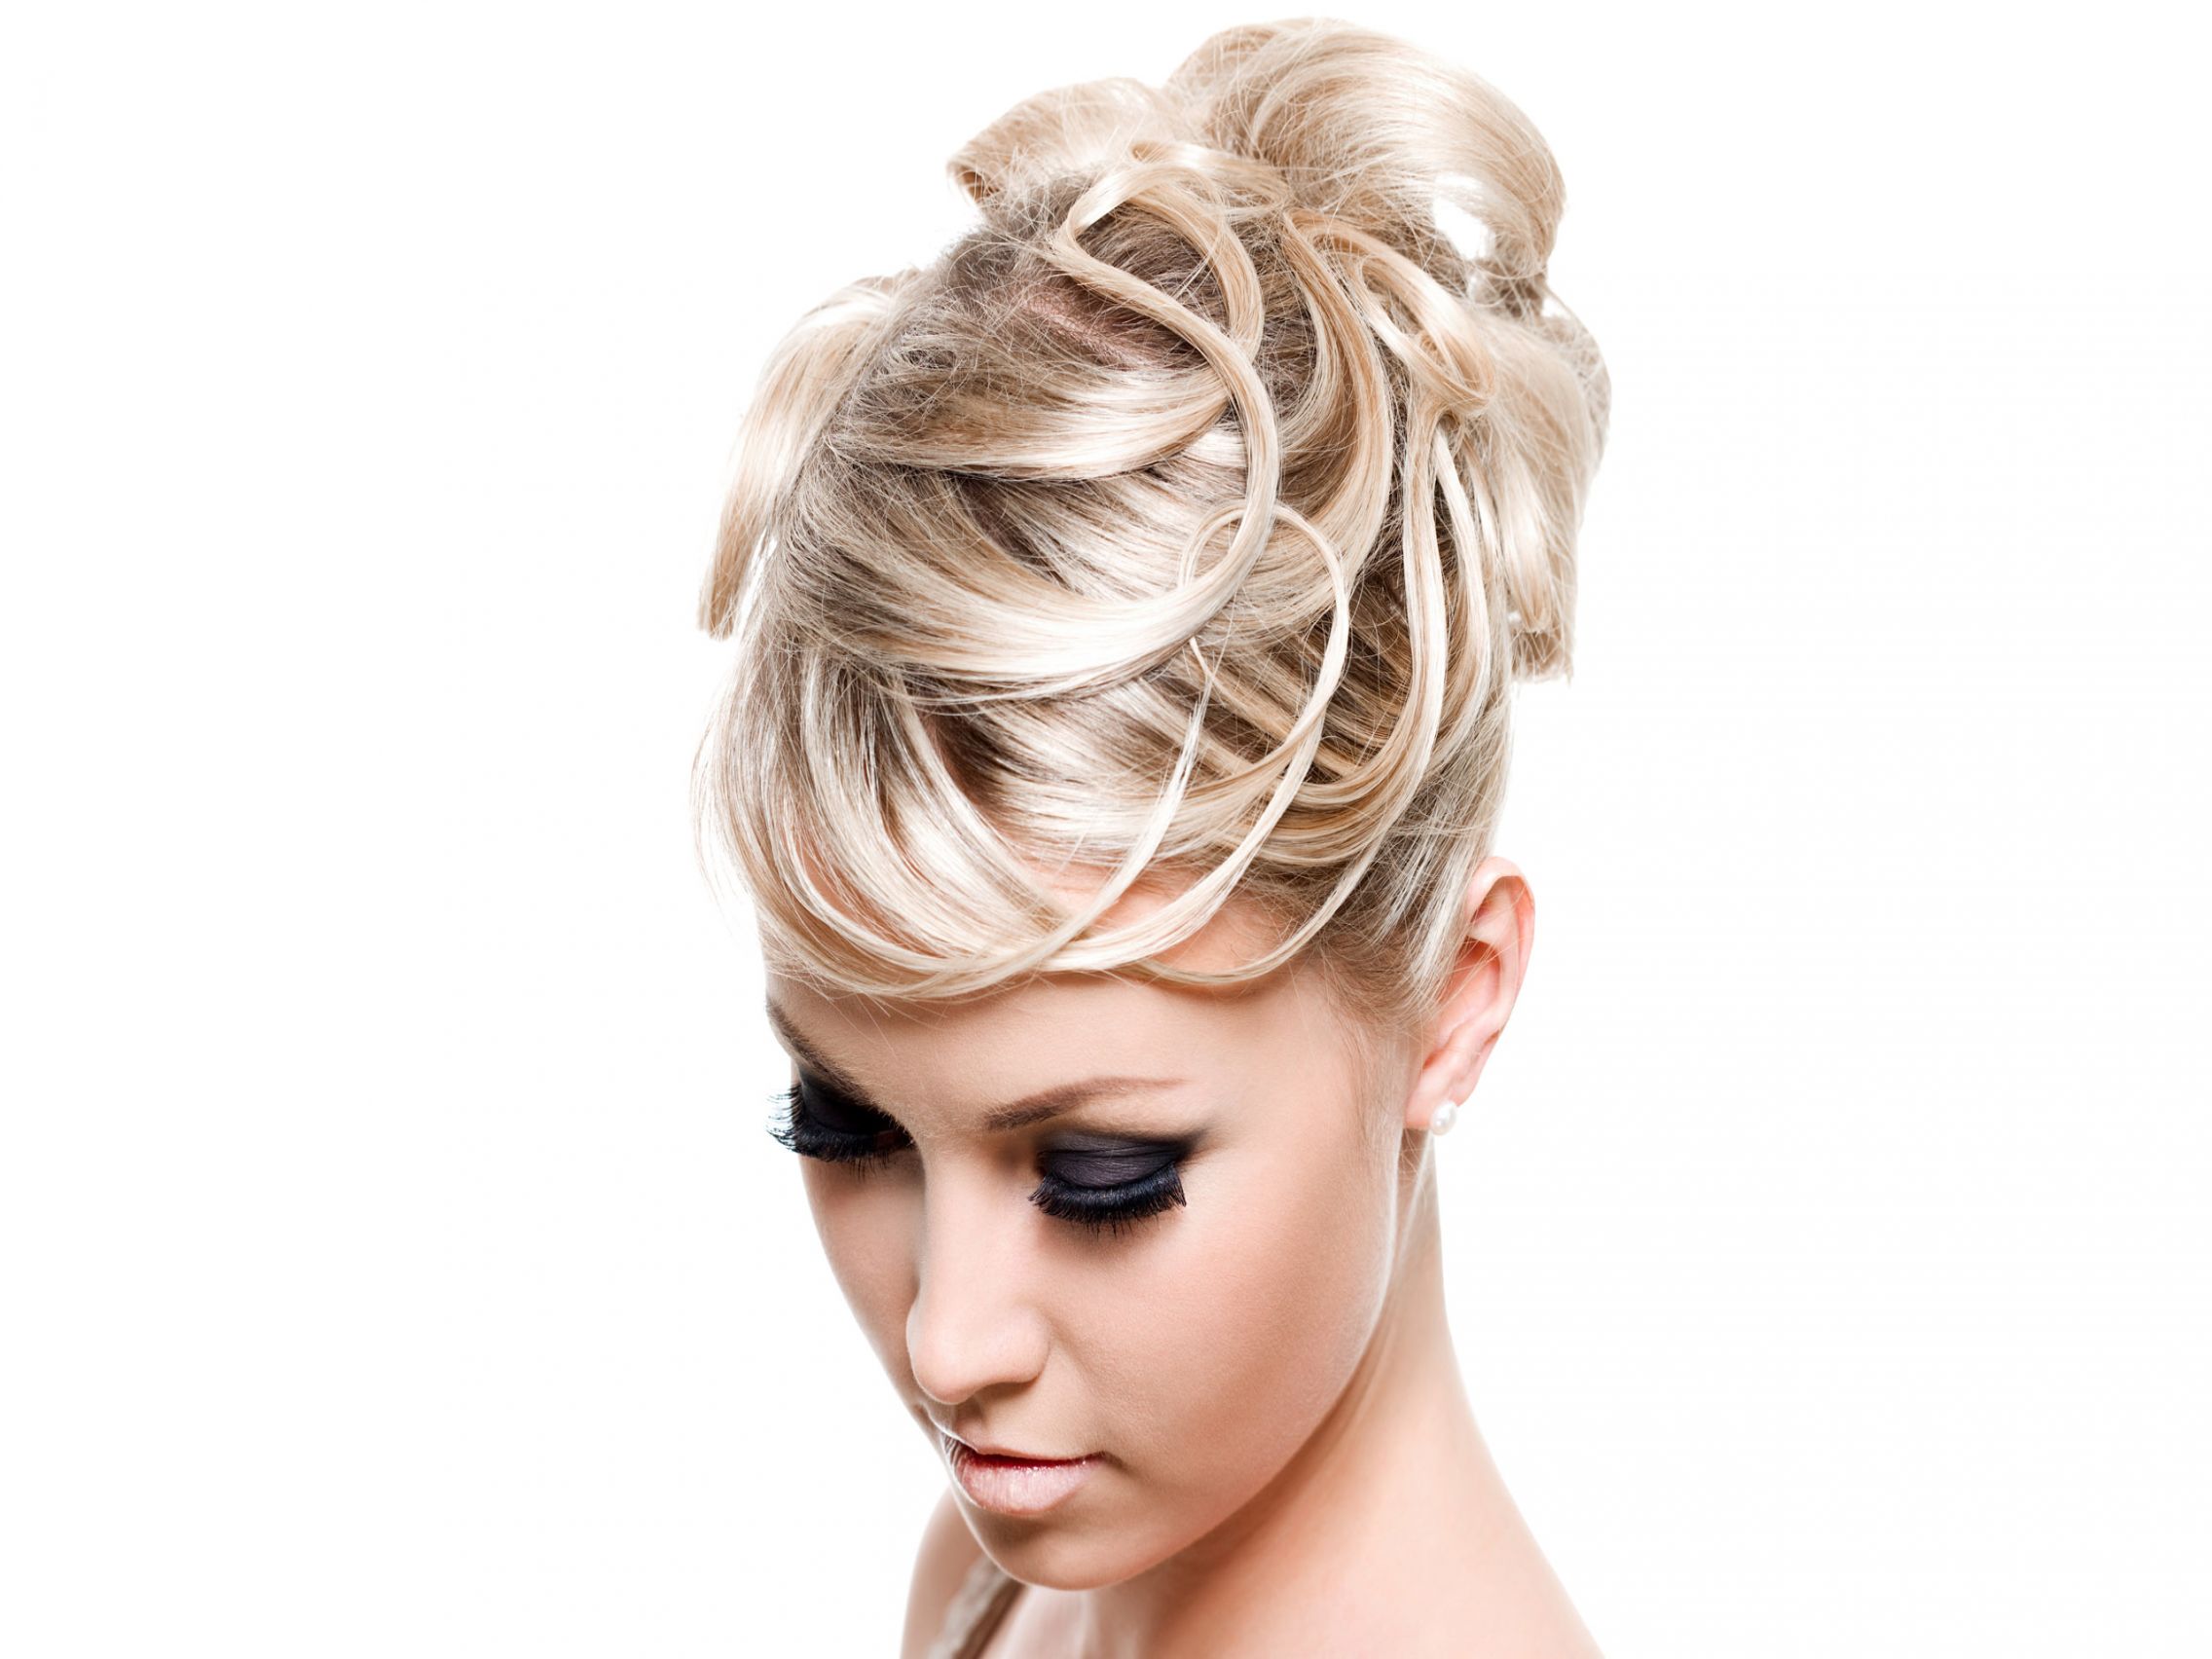 Lovely Hairstyle For Women 22 For Your Ideas with Hairstyle For ...